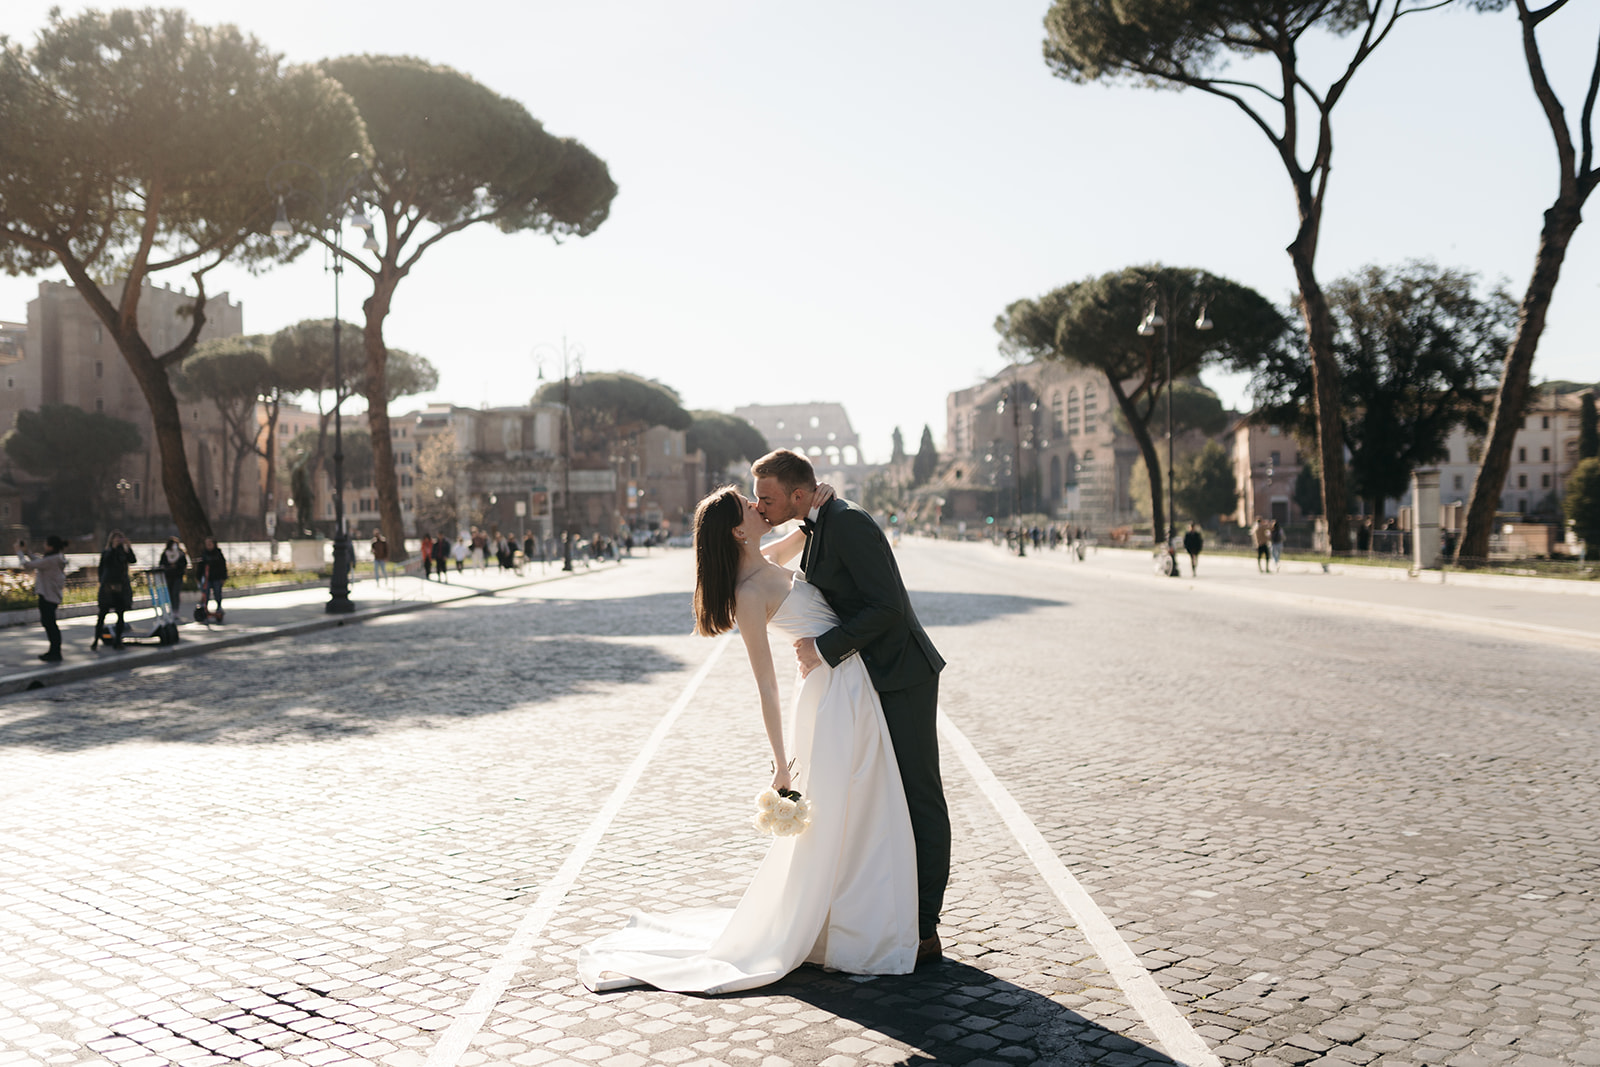 After wedding photoshoot in Rome. Couple walking via dei fori imperiali photographed by Clara Buchberger.